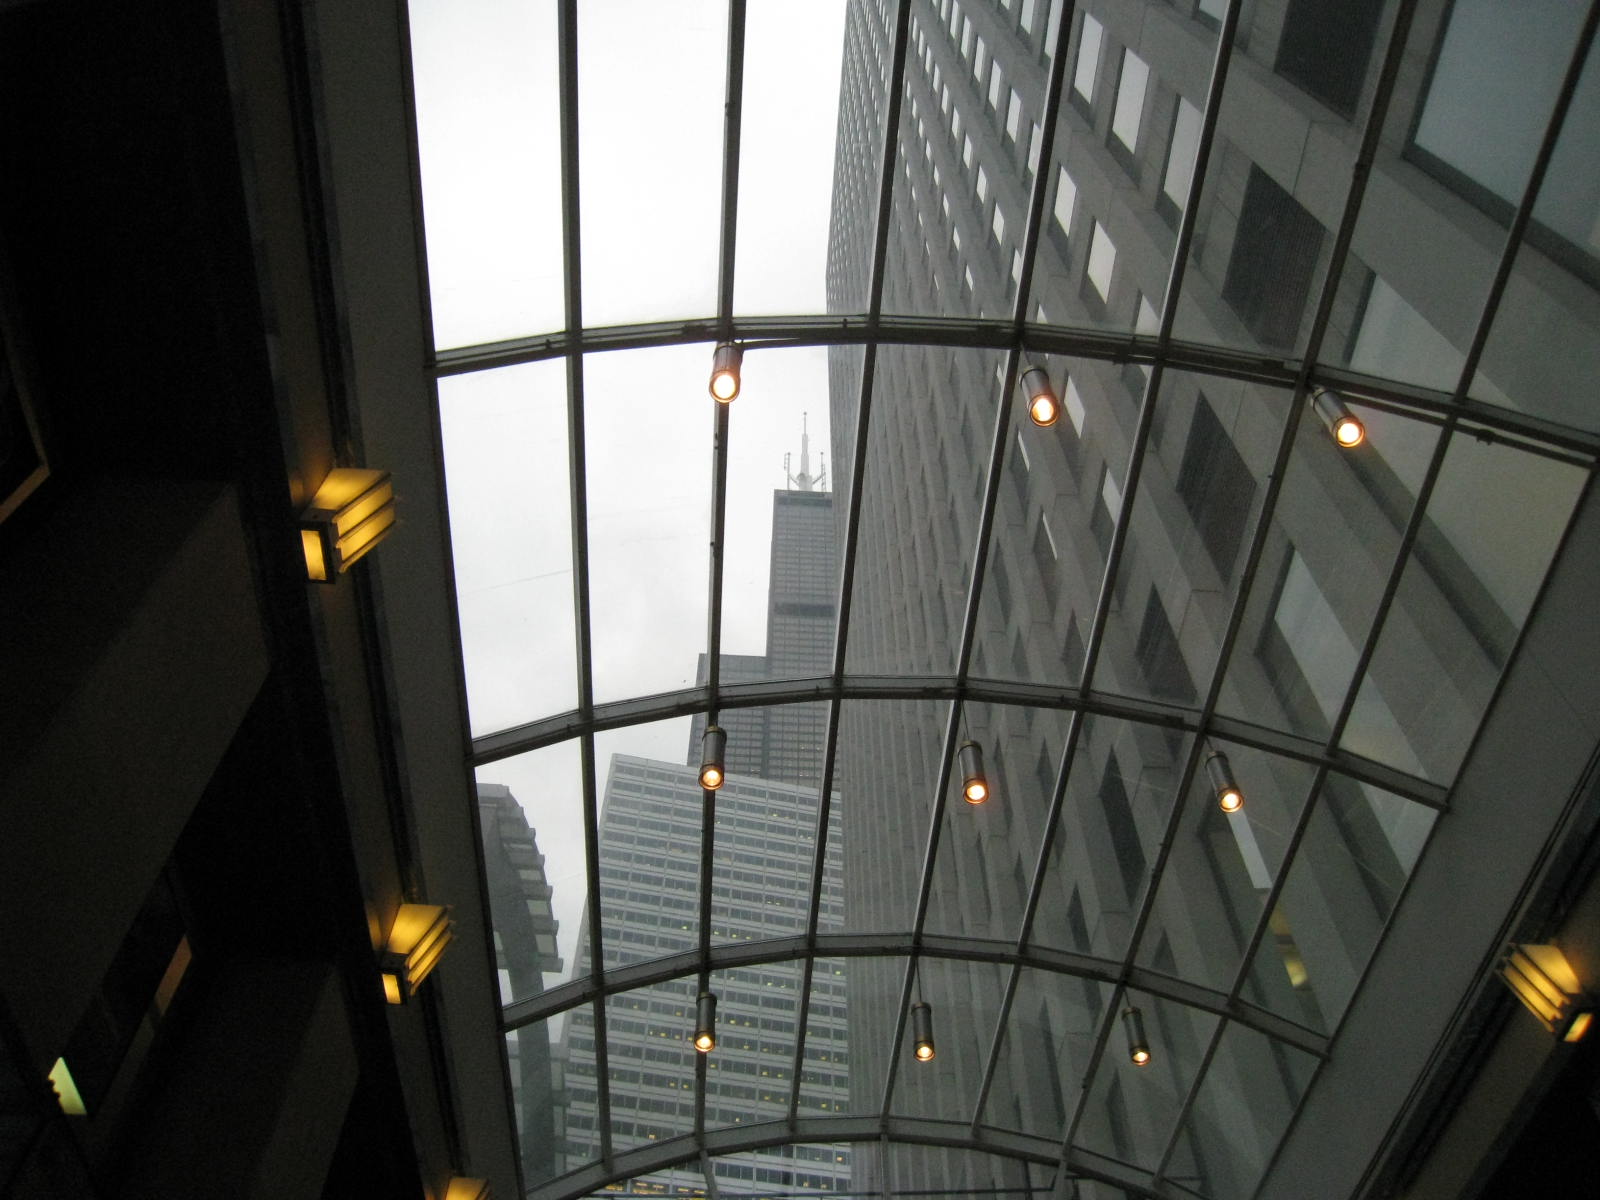 looking up through a glass covered ceiling into a tall building